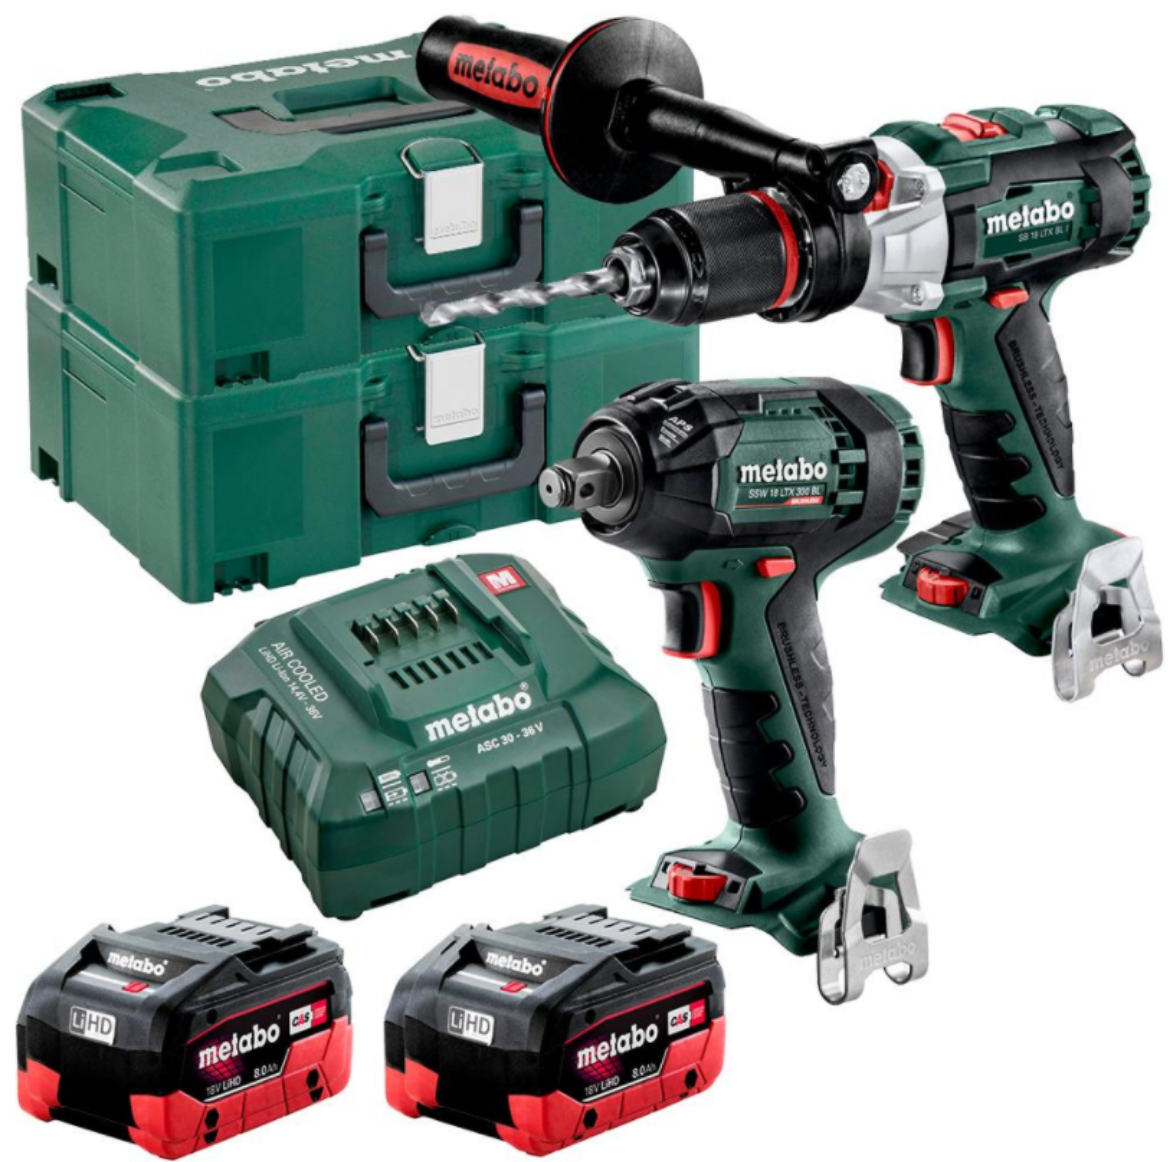 Picture of 18 V BRUSHLESS, HAMMER DRILL/SCREWDRIVER 120 NM +
18 V BRUSHLESS 1/2 IMPACT WRENCH 300 NM
(2 x 8.0 AH LIHD BATTERY PACKS, ASC 55 V AIR-COOLED CHARGER, 2 x METALOC II CASES)